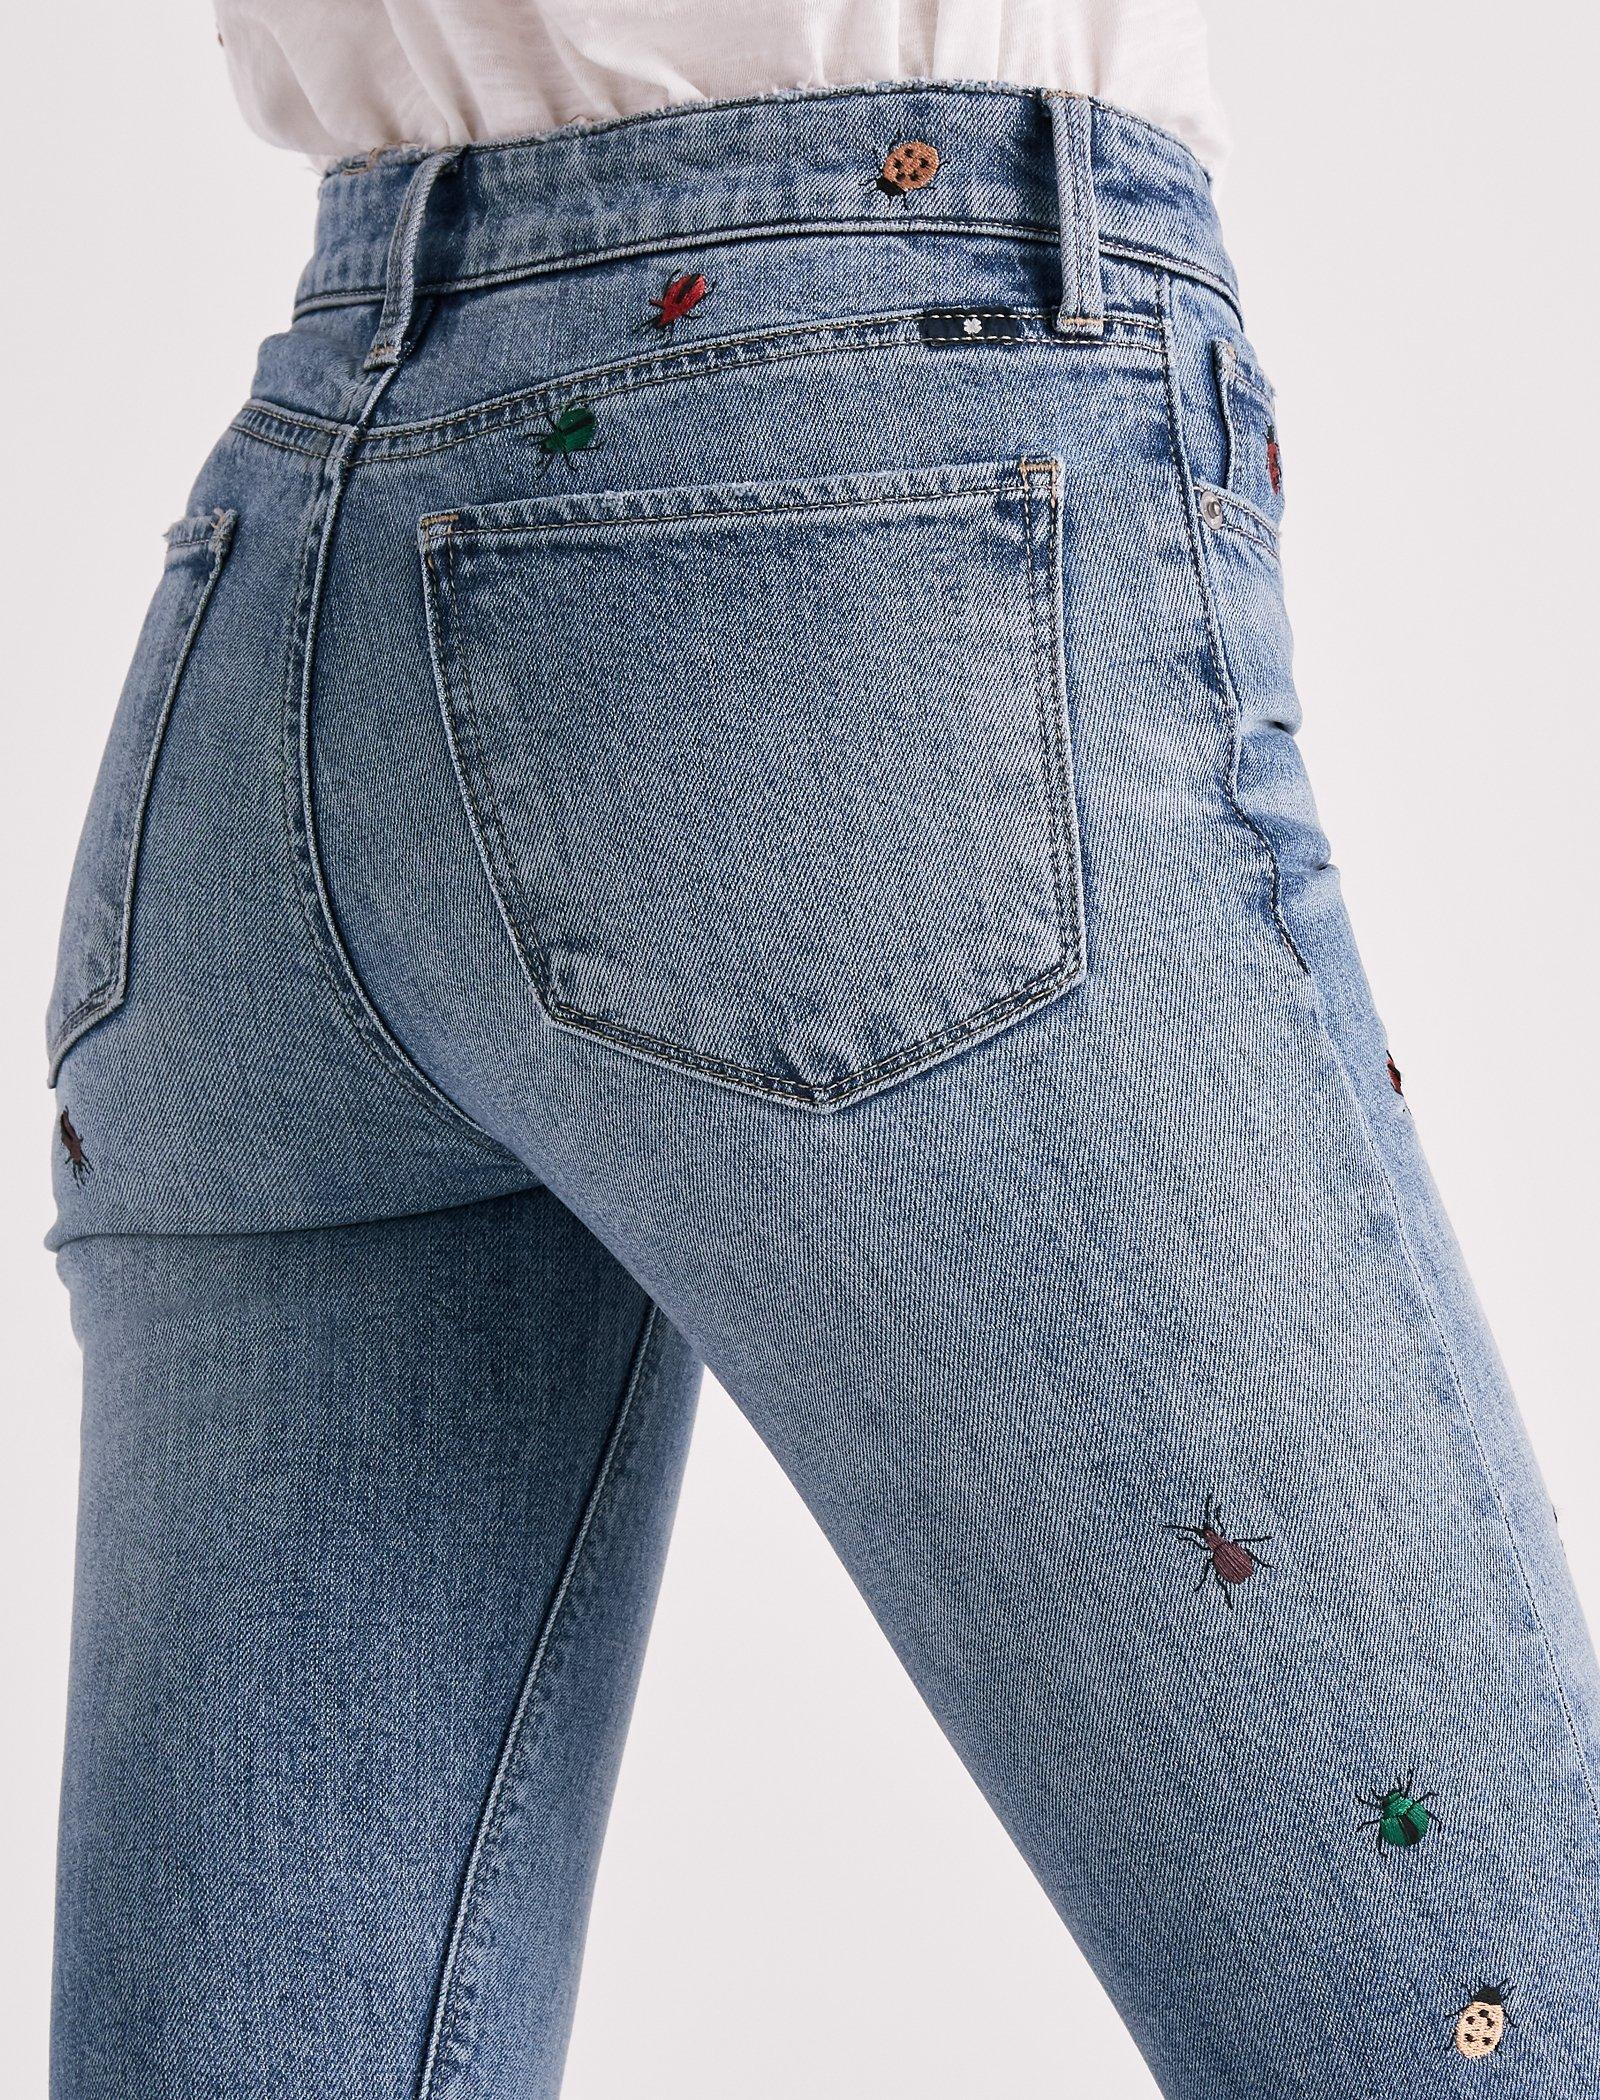 lucky embroidered jeans